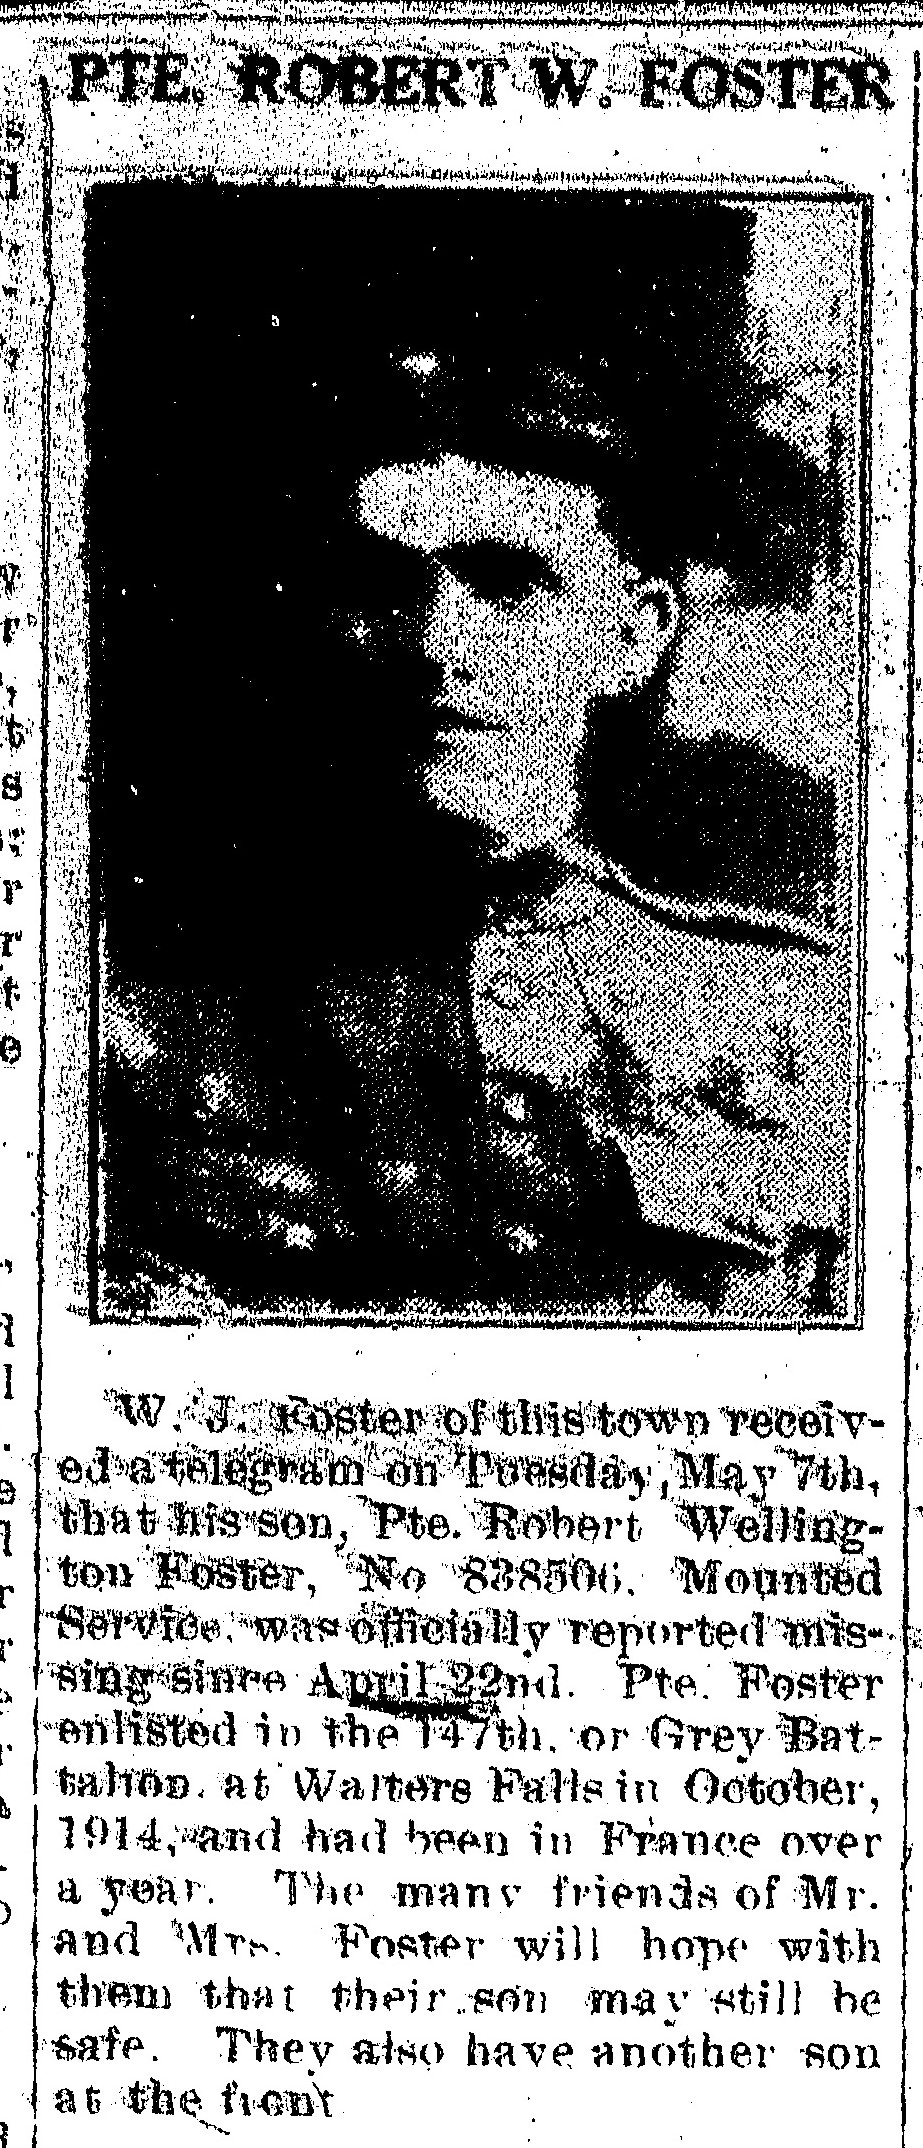 The Chesley Enterprise, May 16, 1918